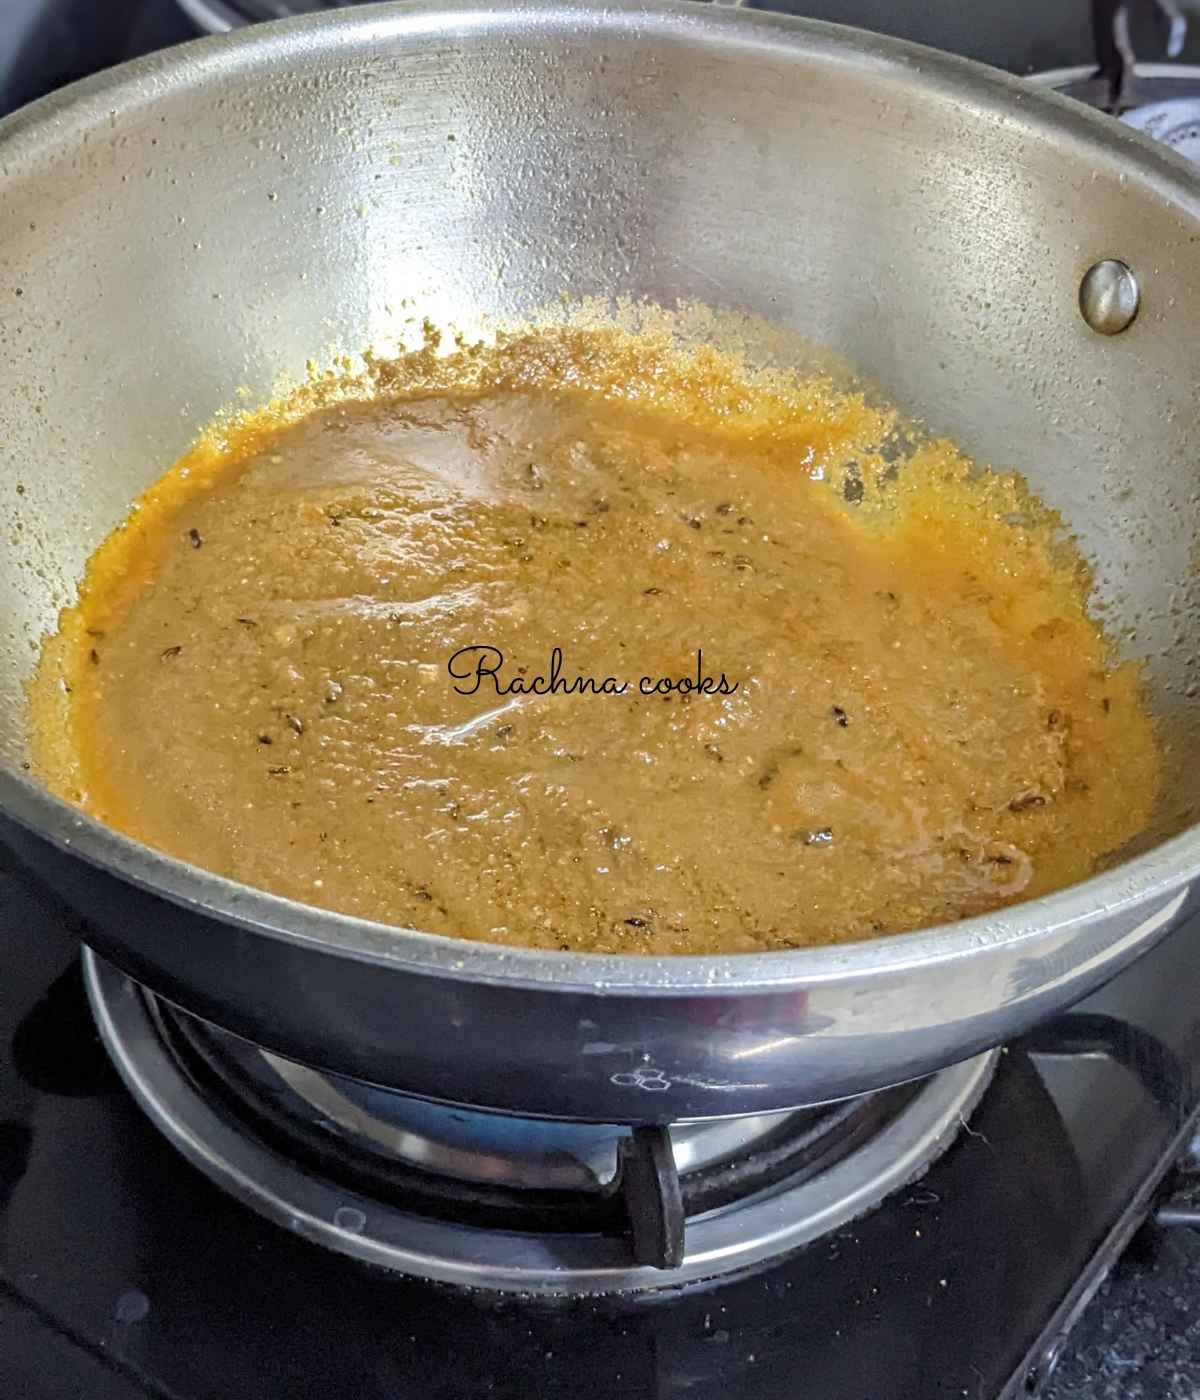 Tomato and other herbs masala paste  being cooked in a pan.